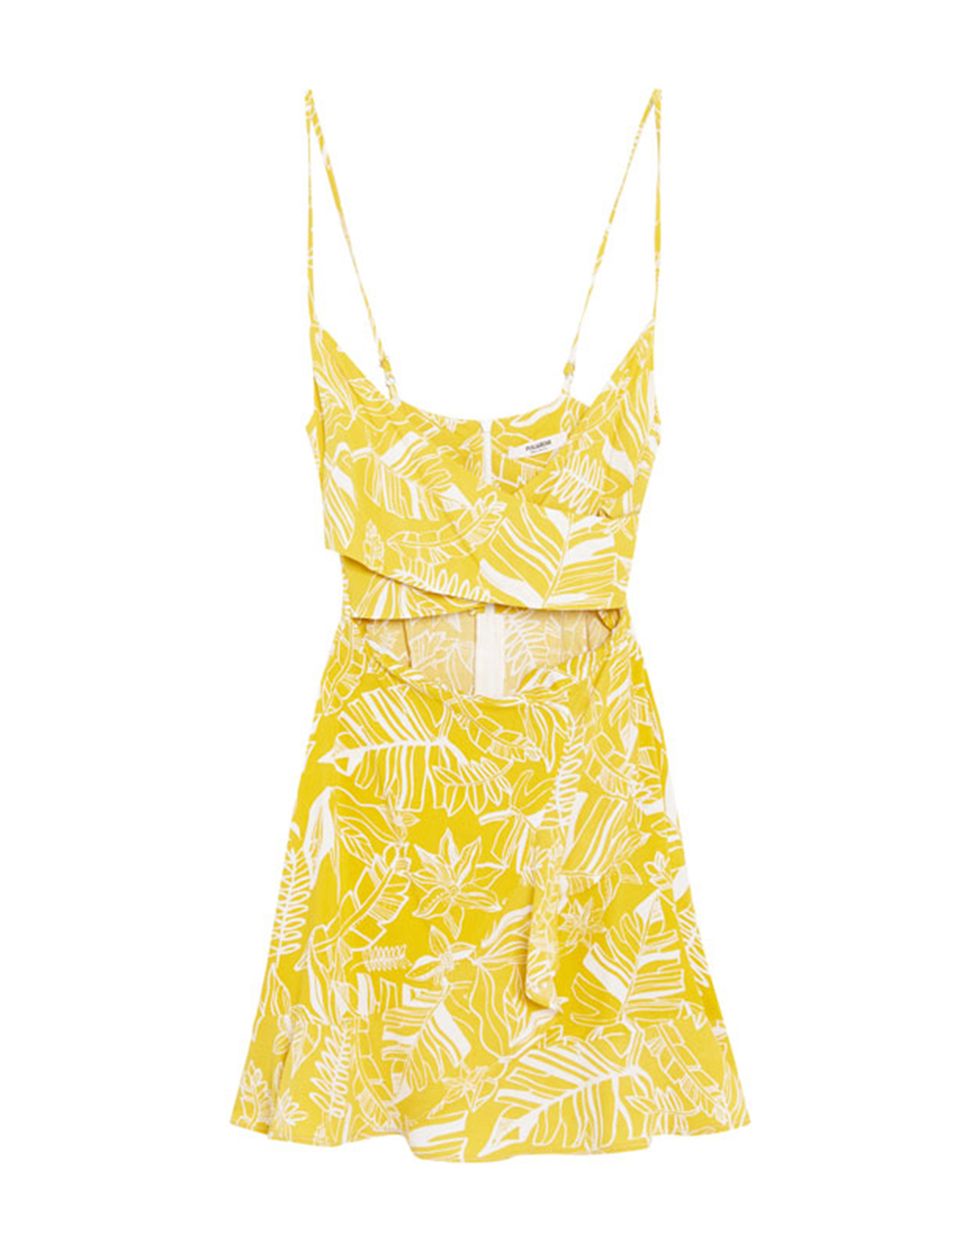 Clothing, Day dress, Yellow, Dress, Cocktail dress, One-piece garment, camisoles, Neck, Pattern, Cover-up, 